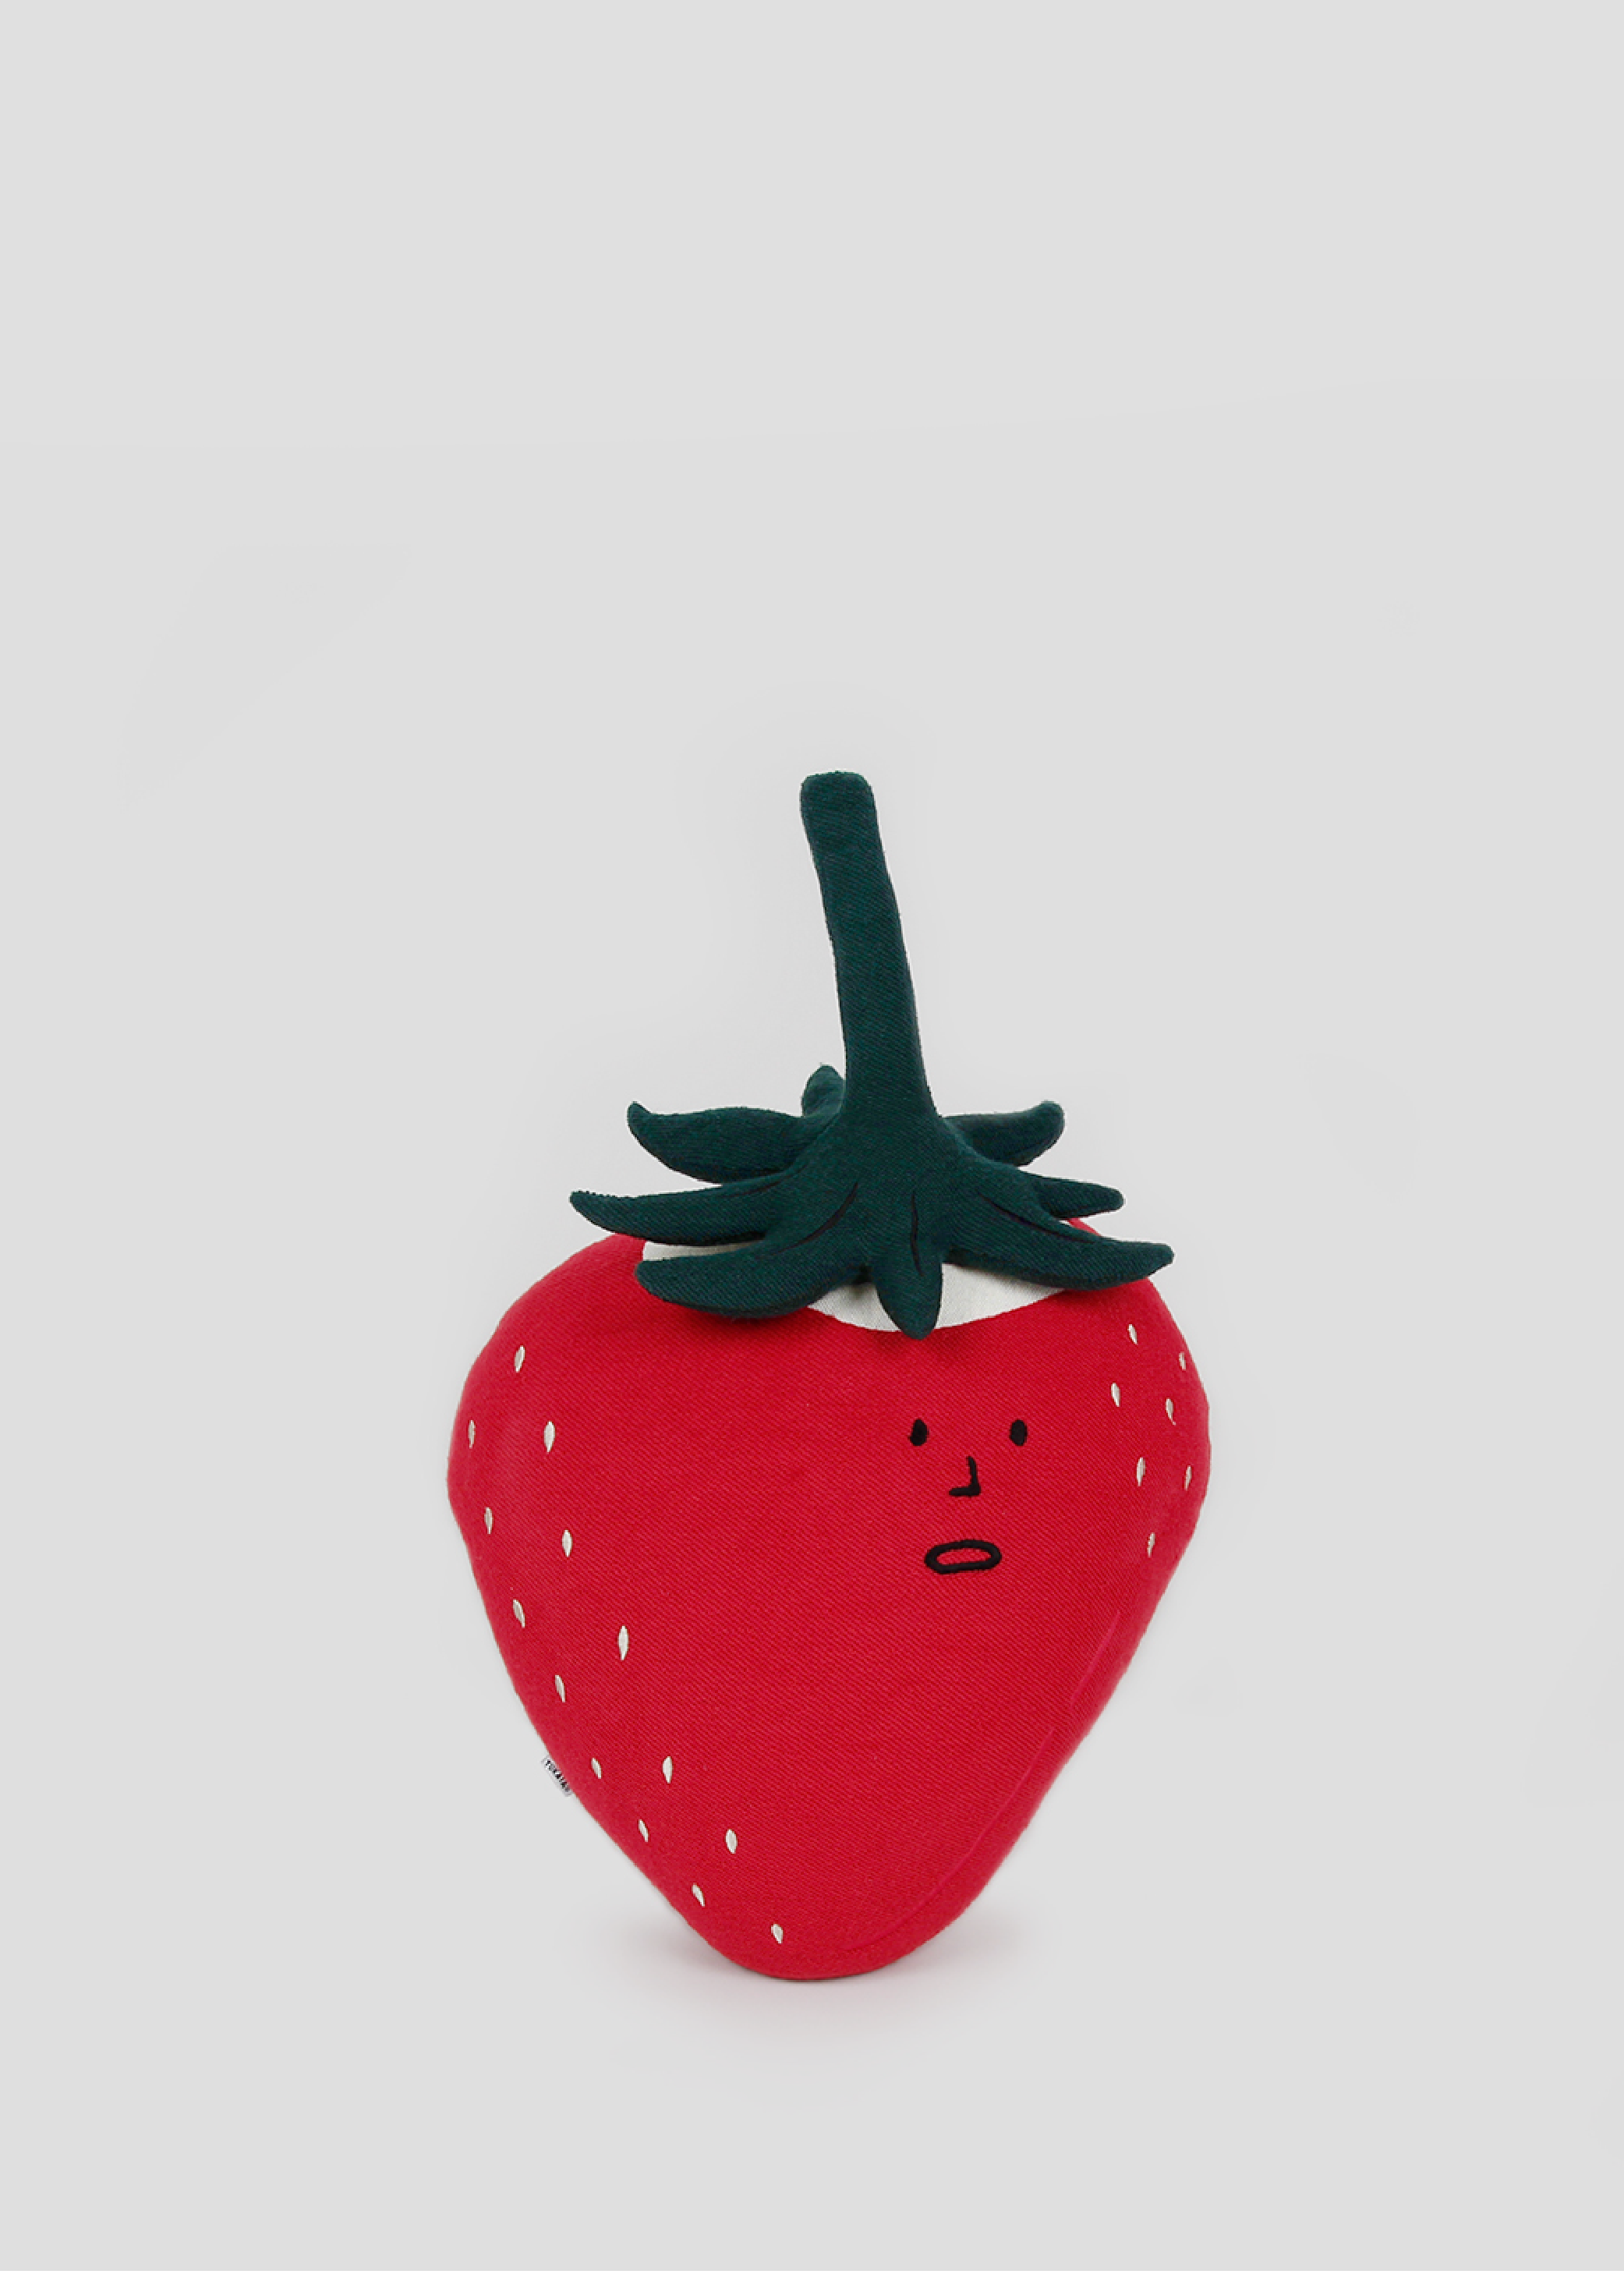 berry (small) doll key-ring